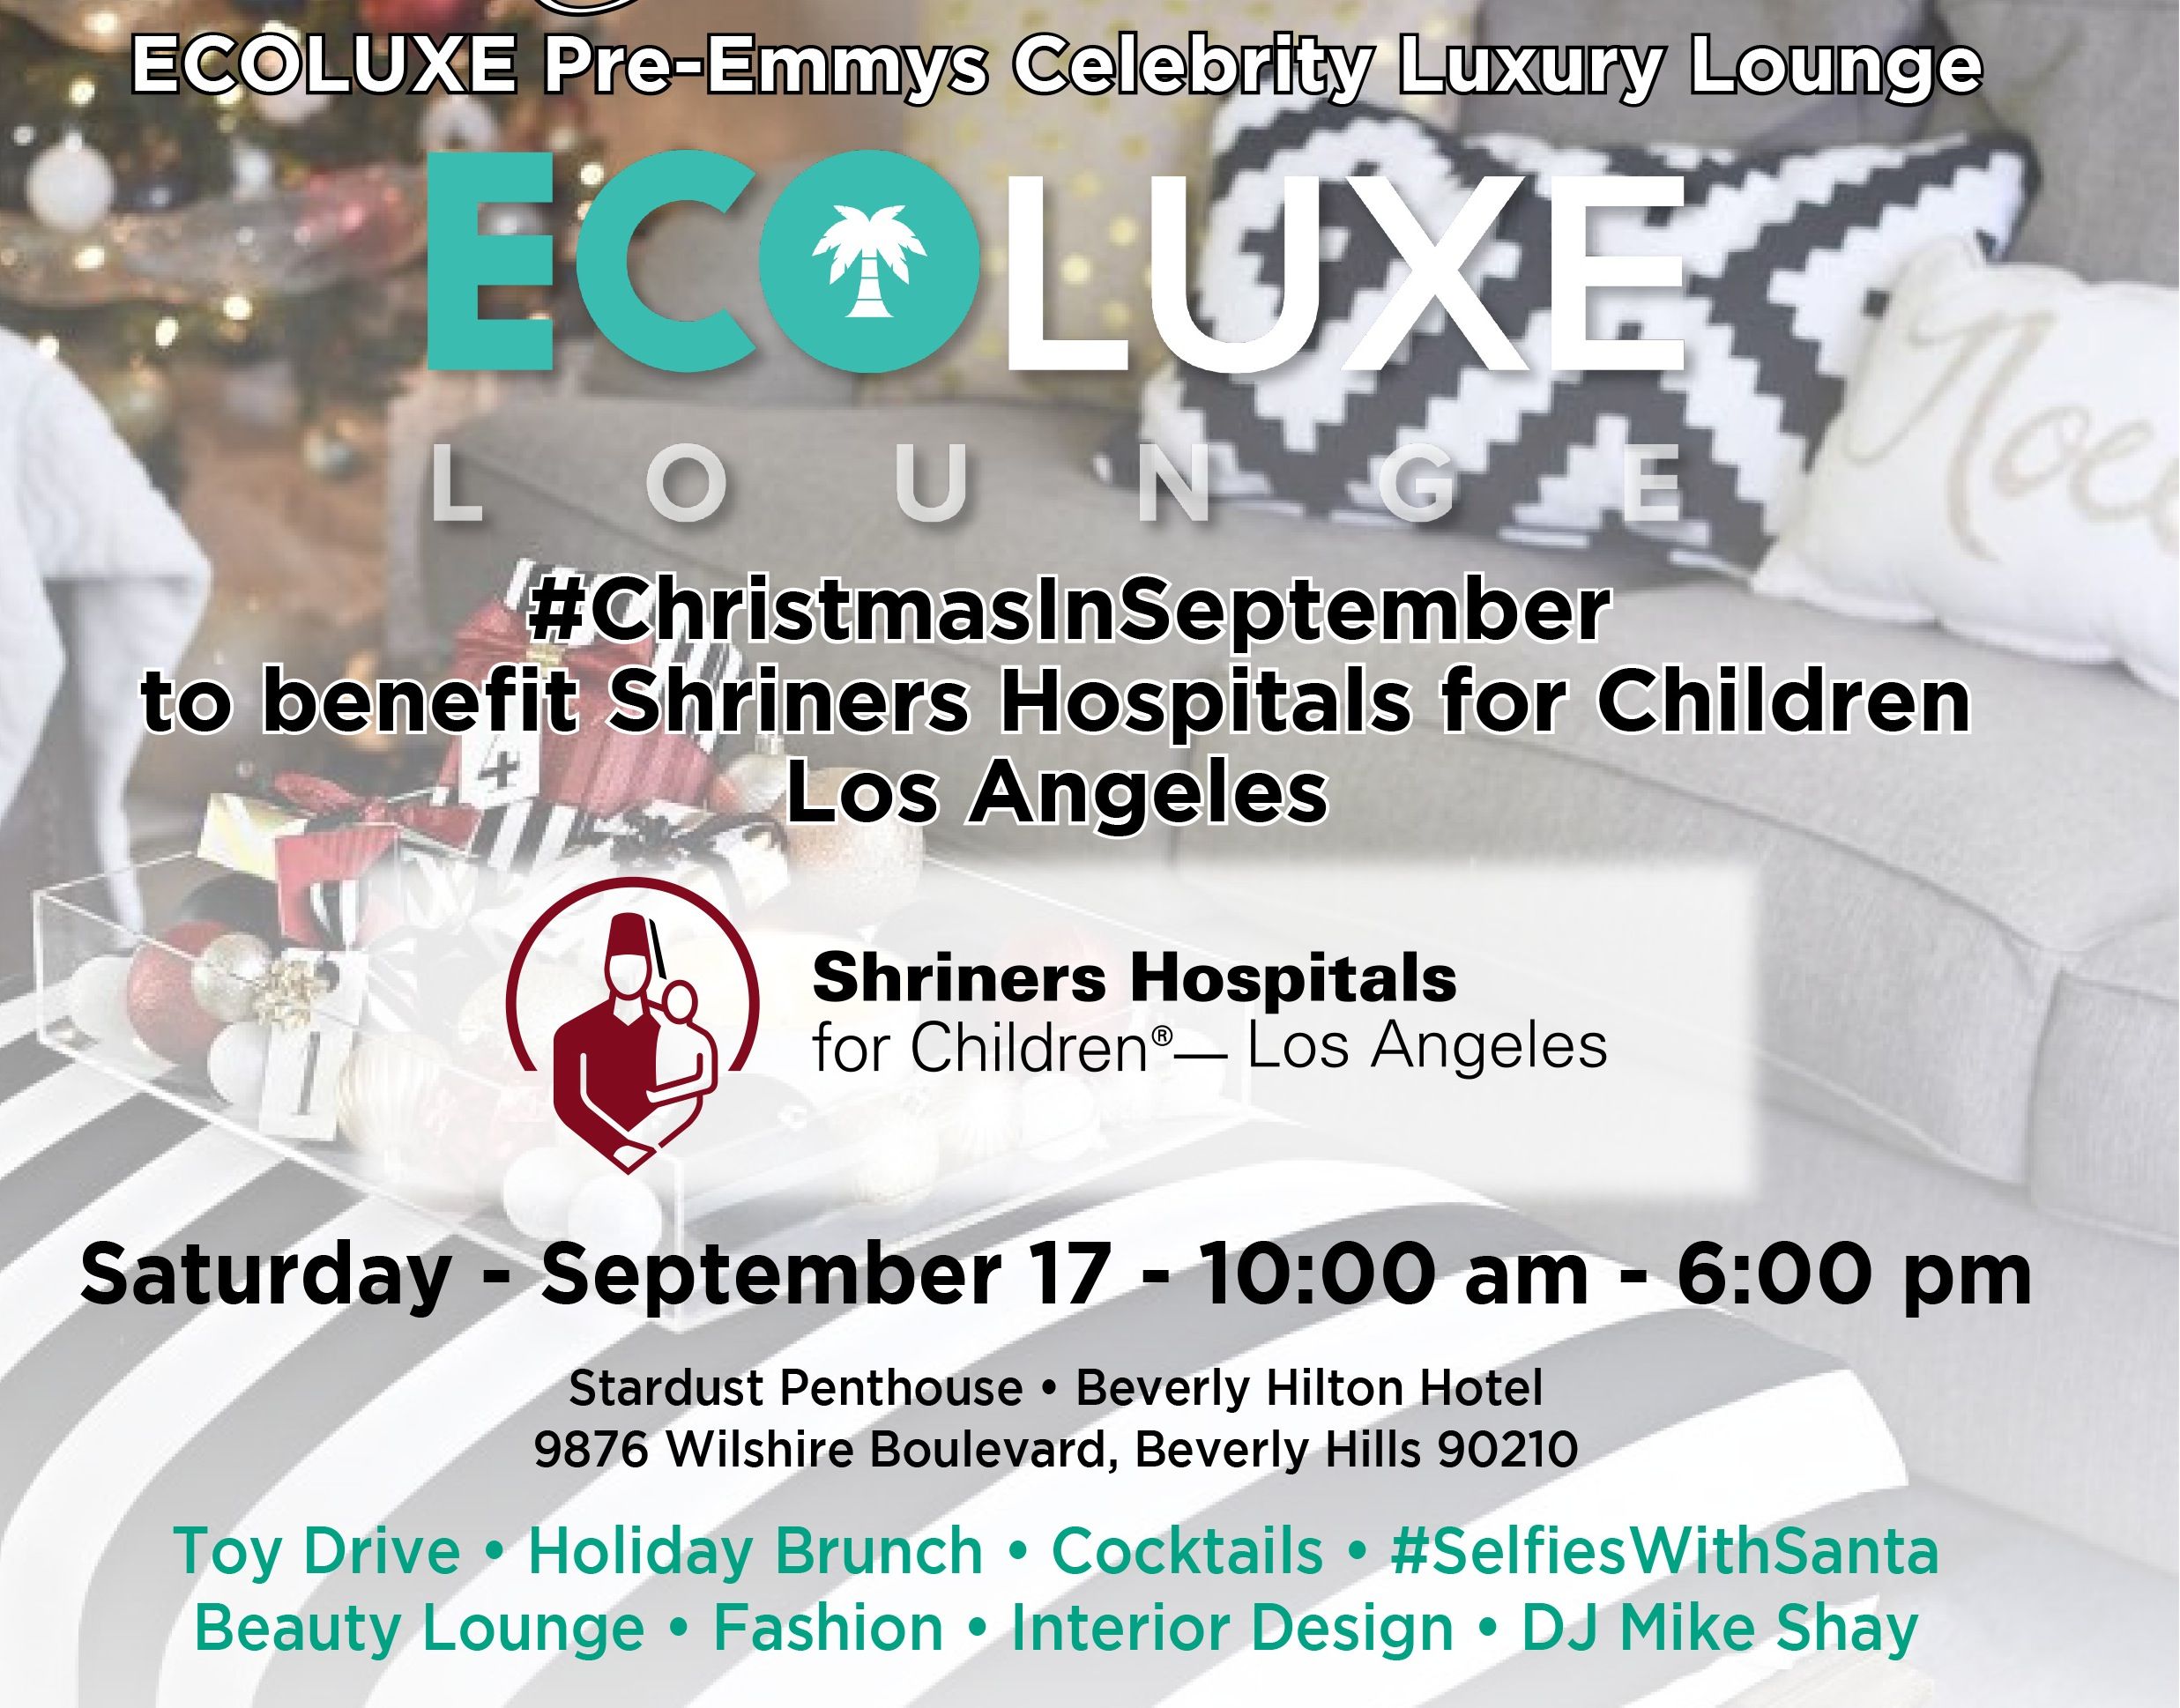 Emmy Awards Ultimate Event Guide Pre-Emmys EcoLuxe Celebrity Luxury Lounge